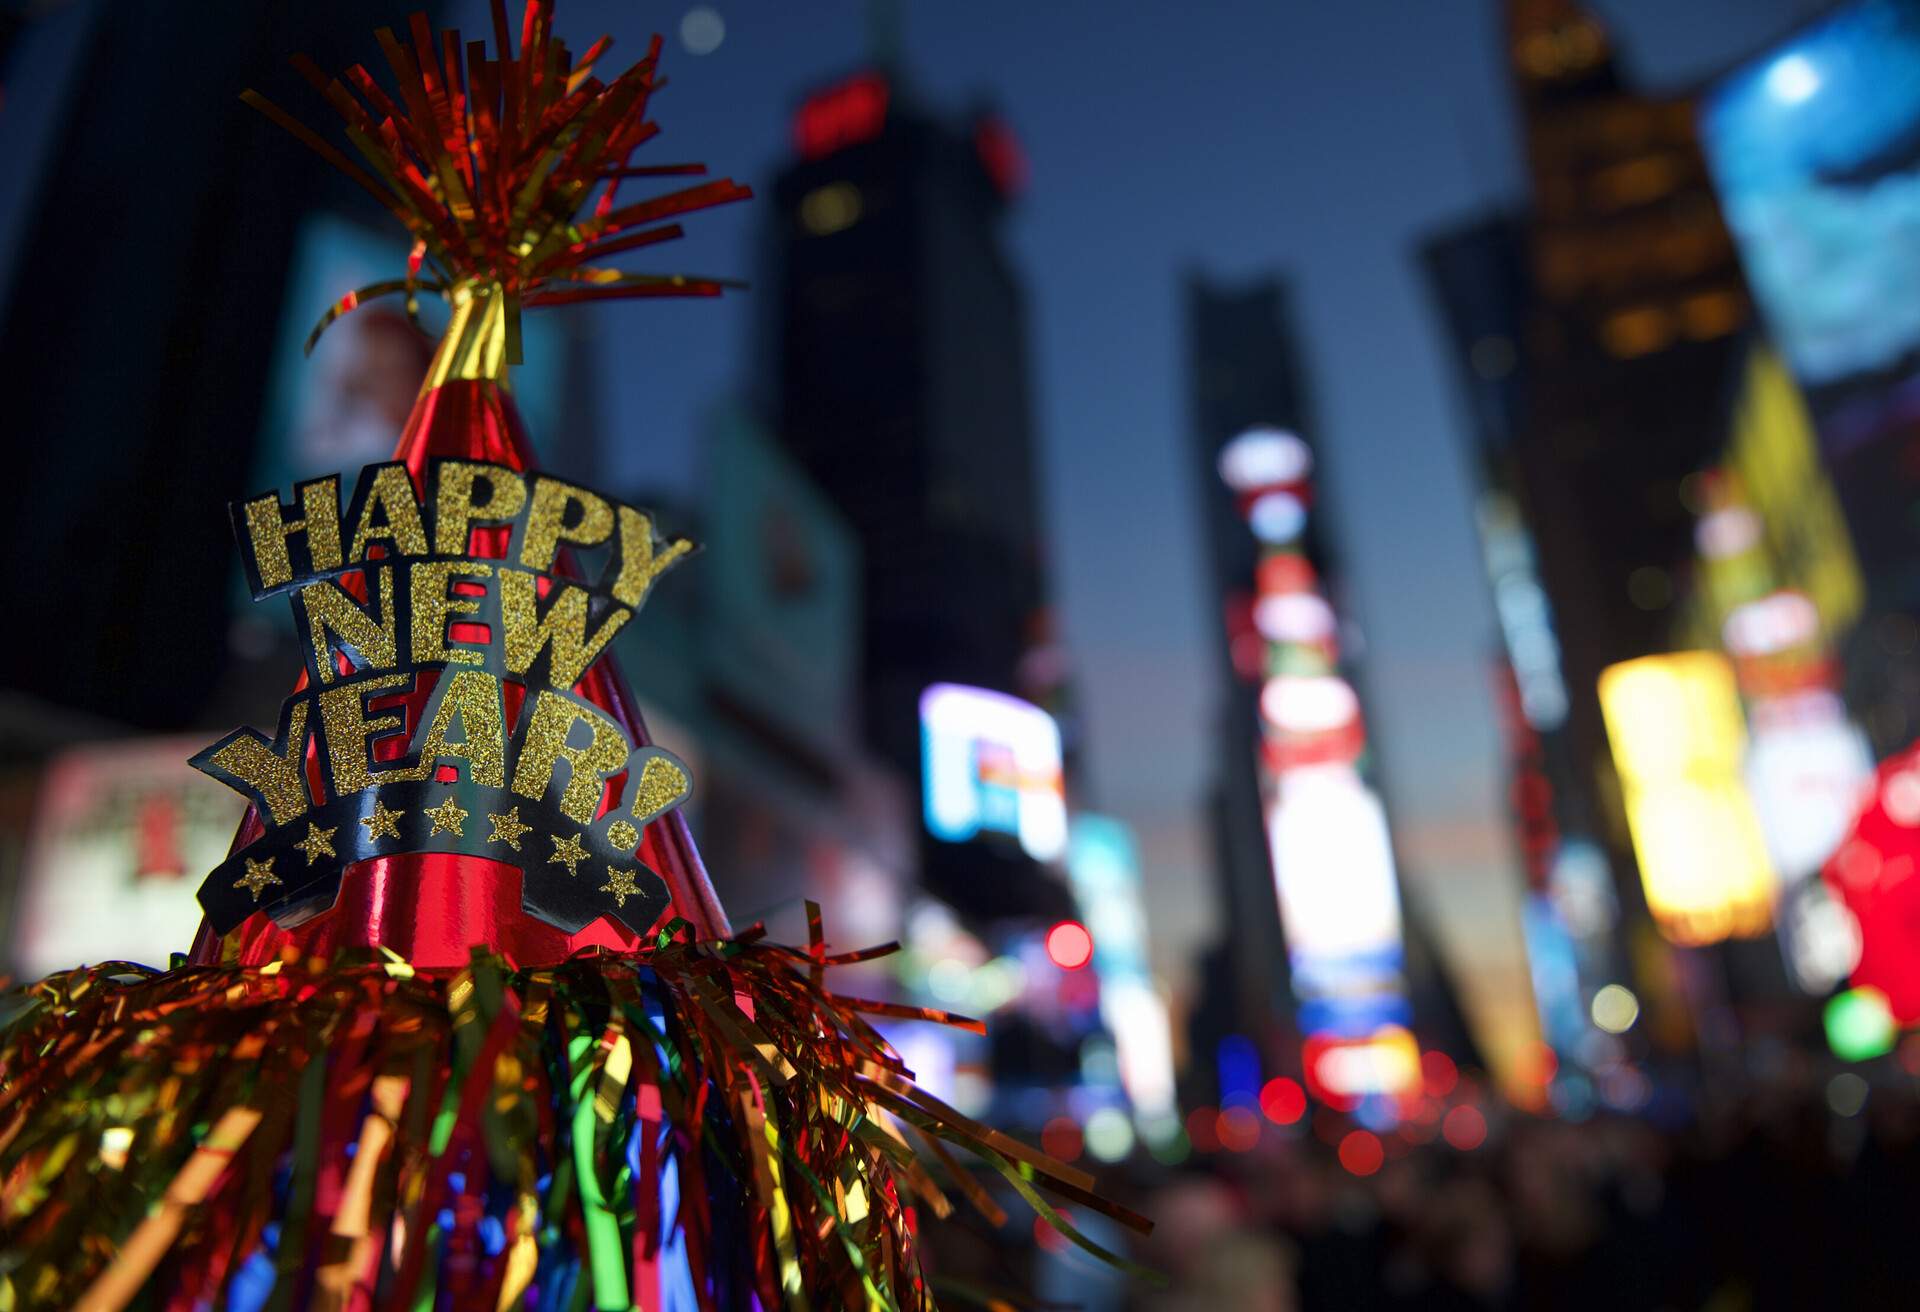 Happy New Year hat with colorful decoration in Times Square New York City; Shutterstock ID 240163873